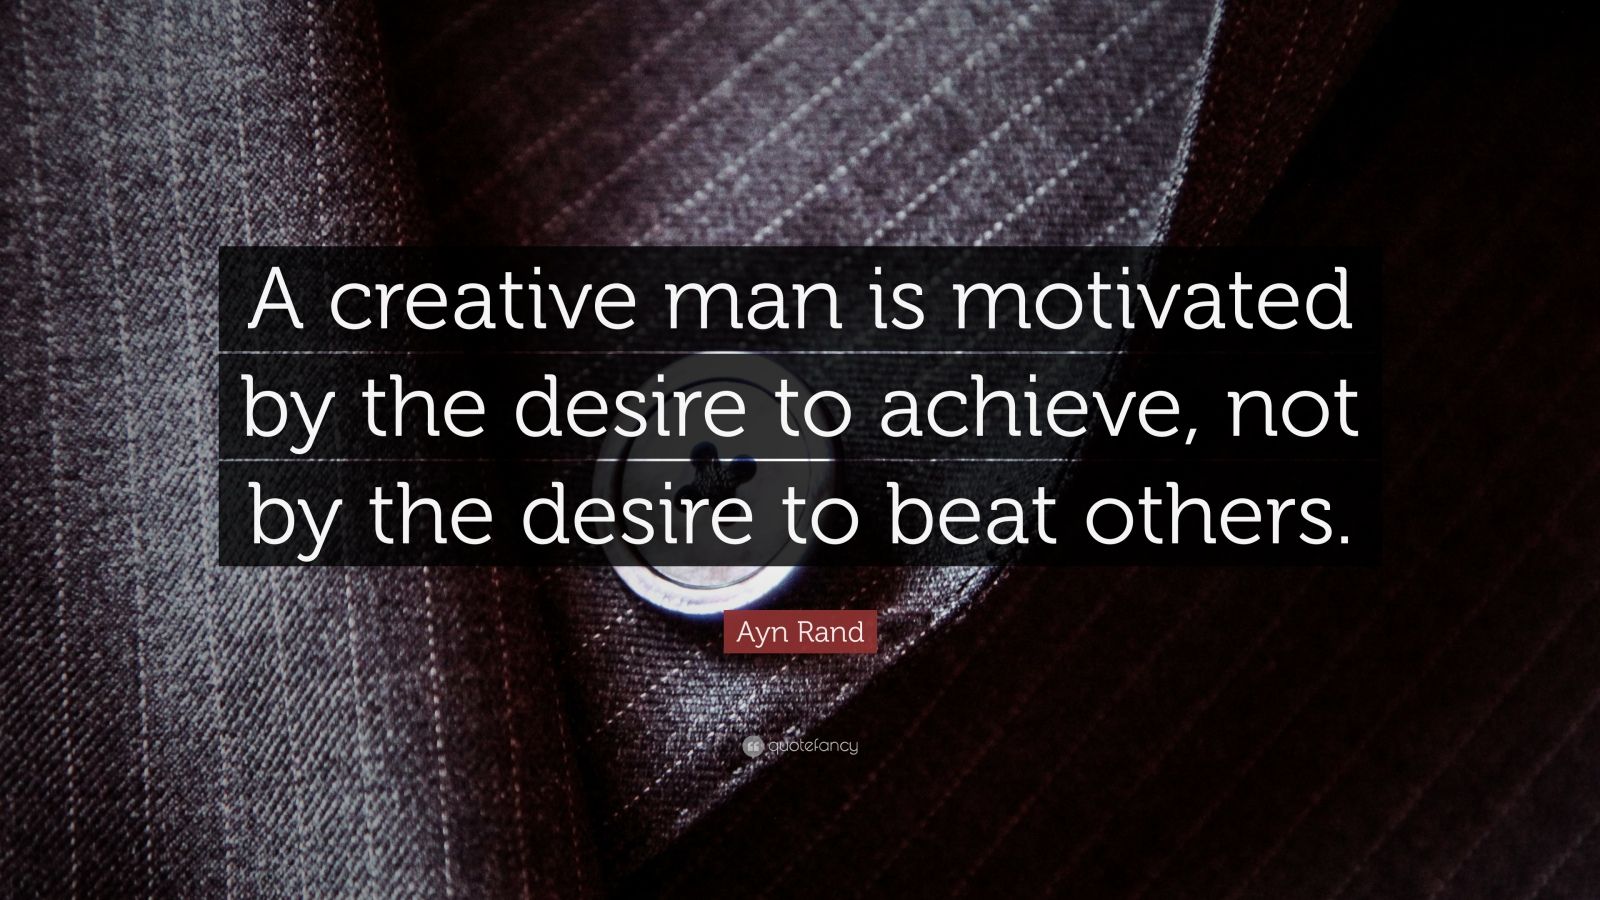 Ayn Rand Quote: “A creative man is motivated by the desire to achieve